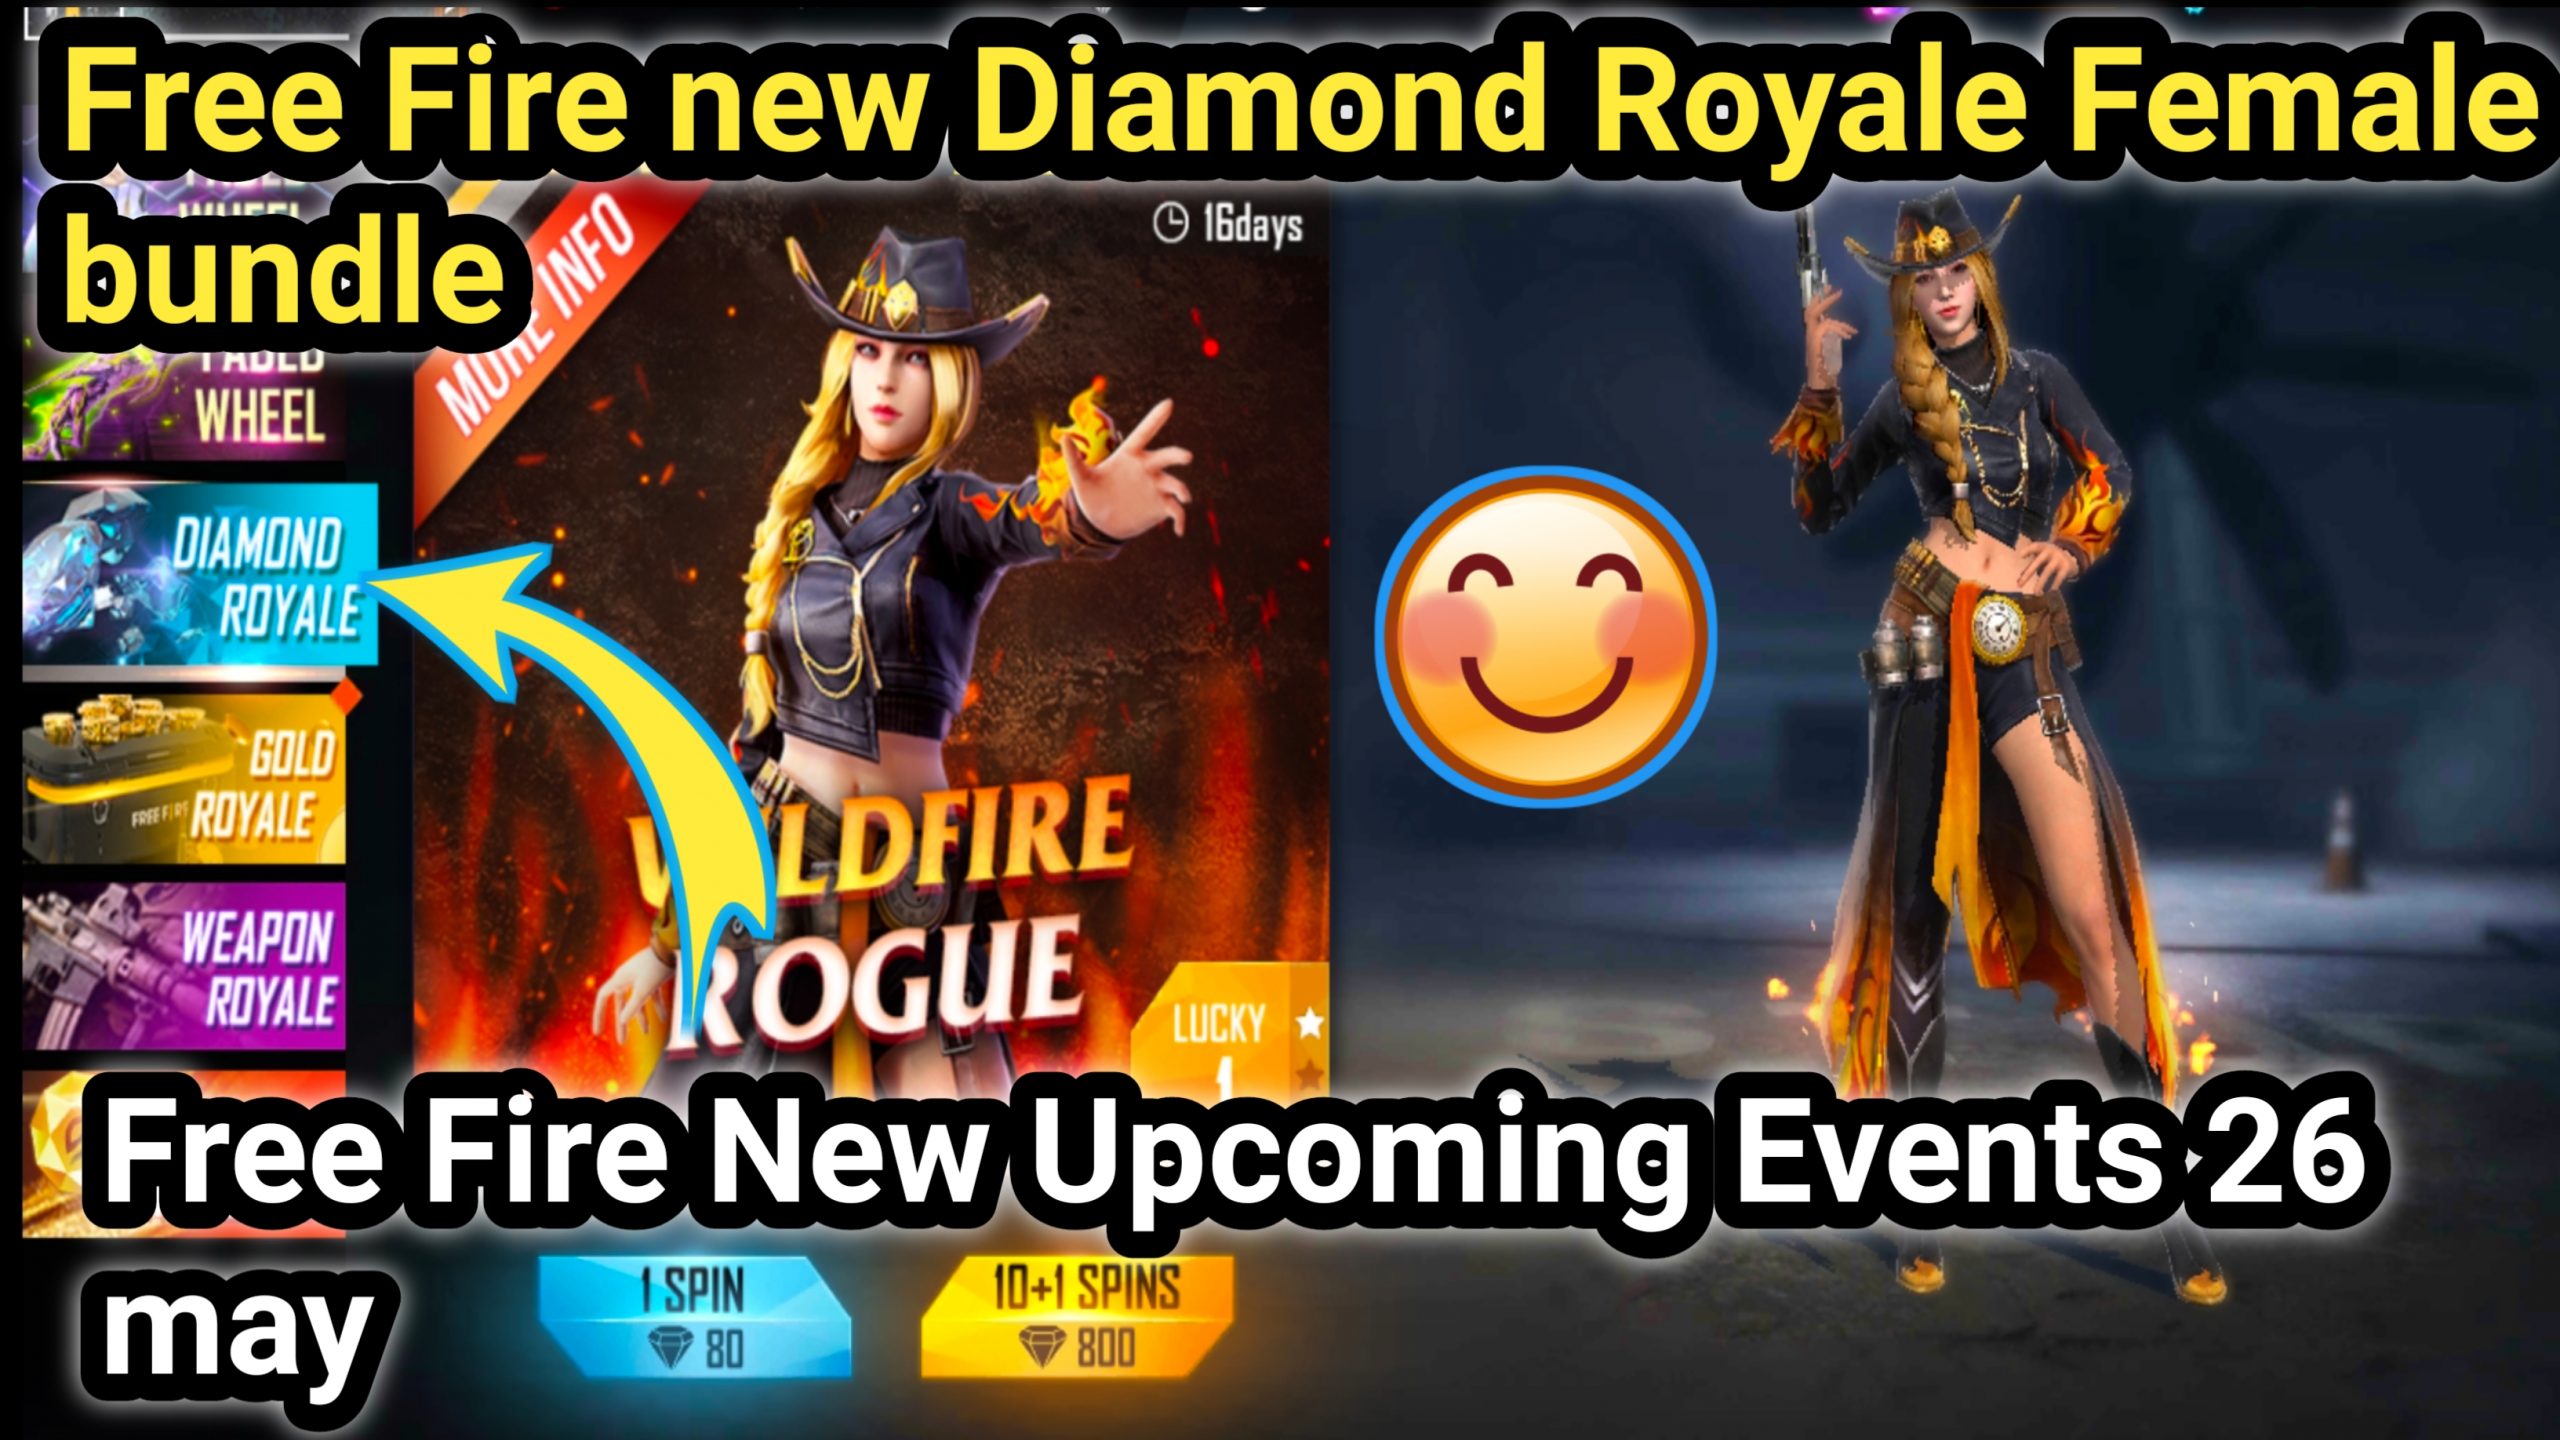 FREE FIRE NEW EVENT